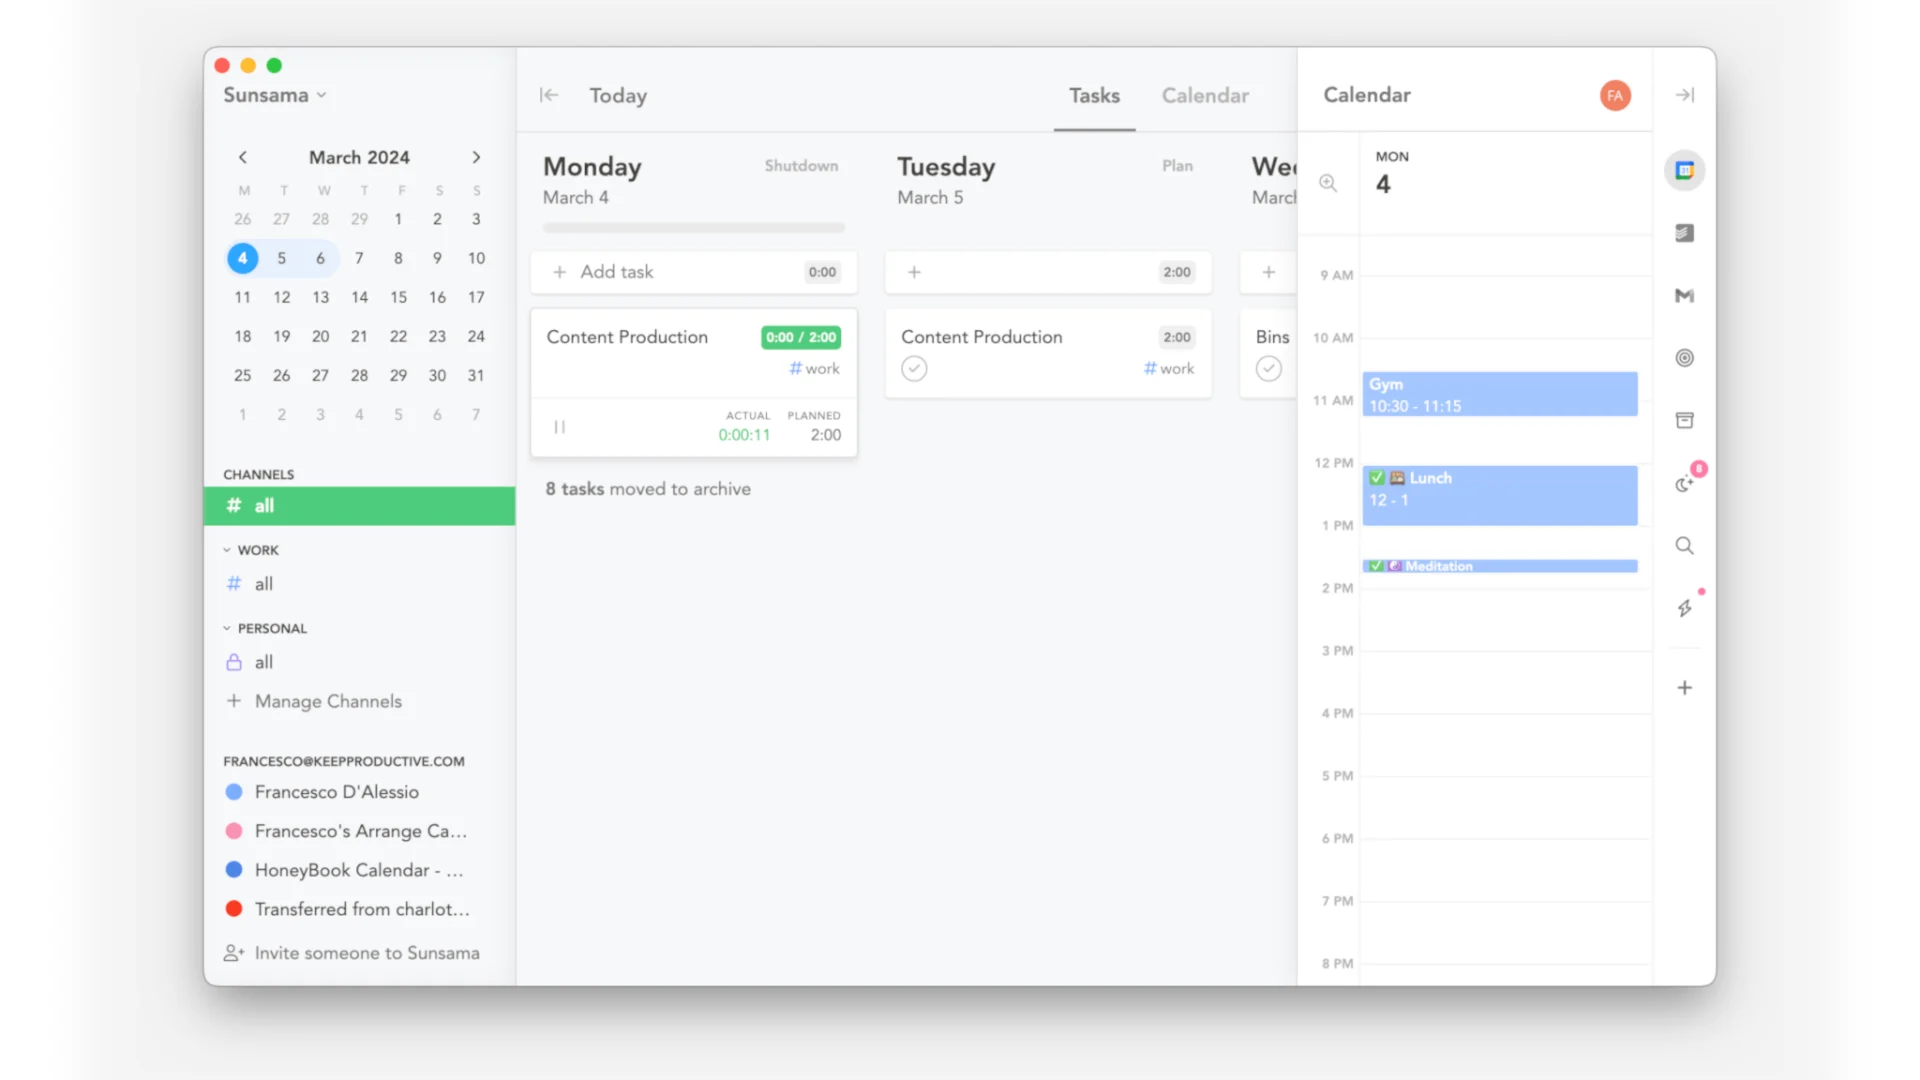 Sunsama Home view for managing tasks and calendar